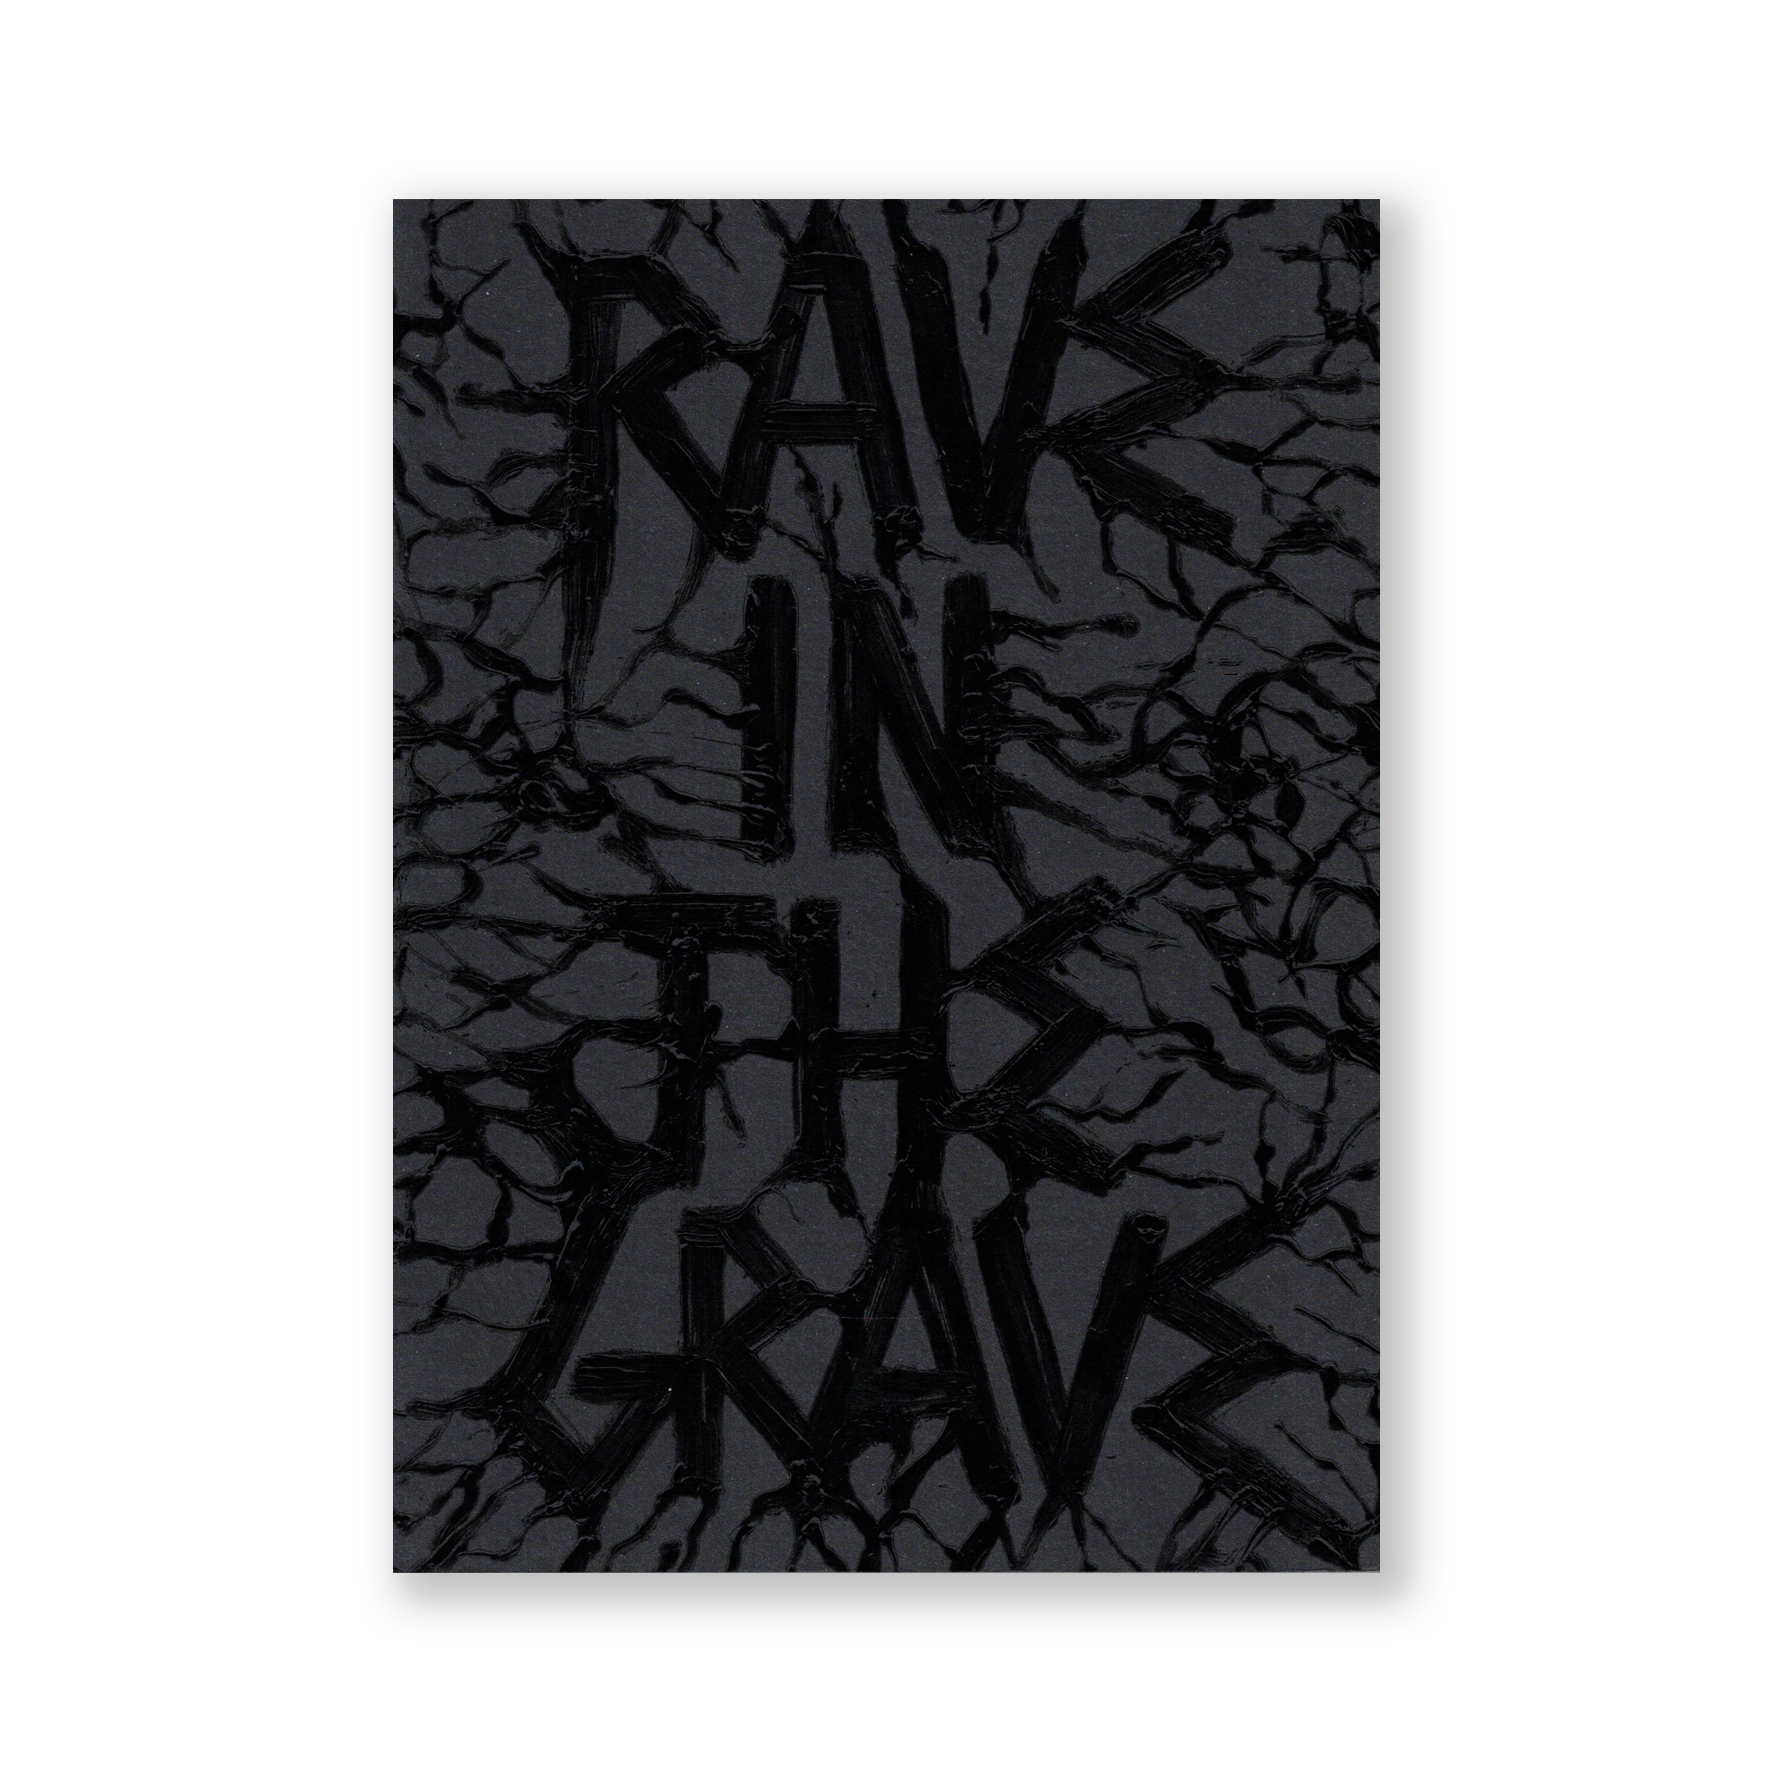 Rave in the grave